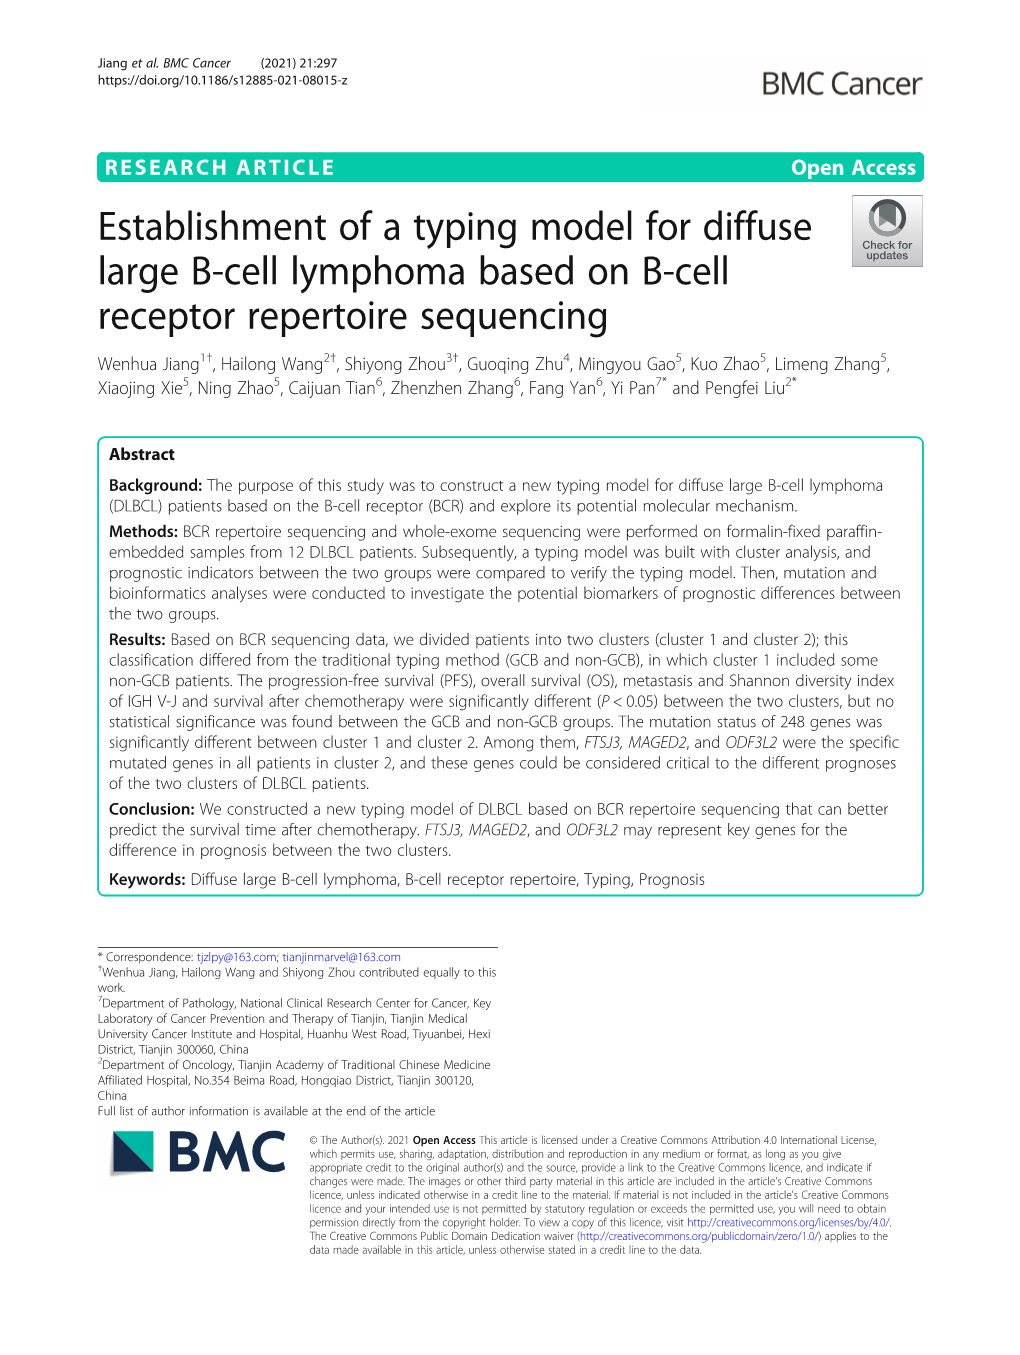 Establishment of a Typing Model for Diffuse Large B-Cell Lymphoma Based on B-Cell Receptor Repertoire Sequencing